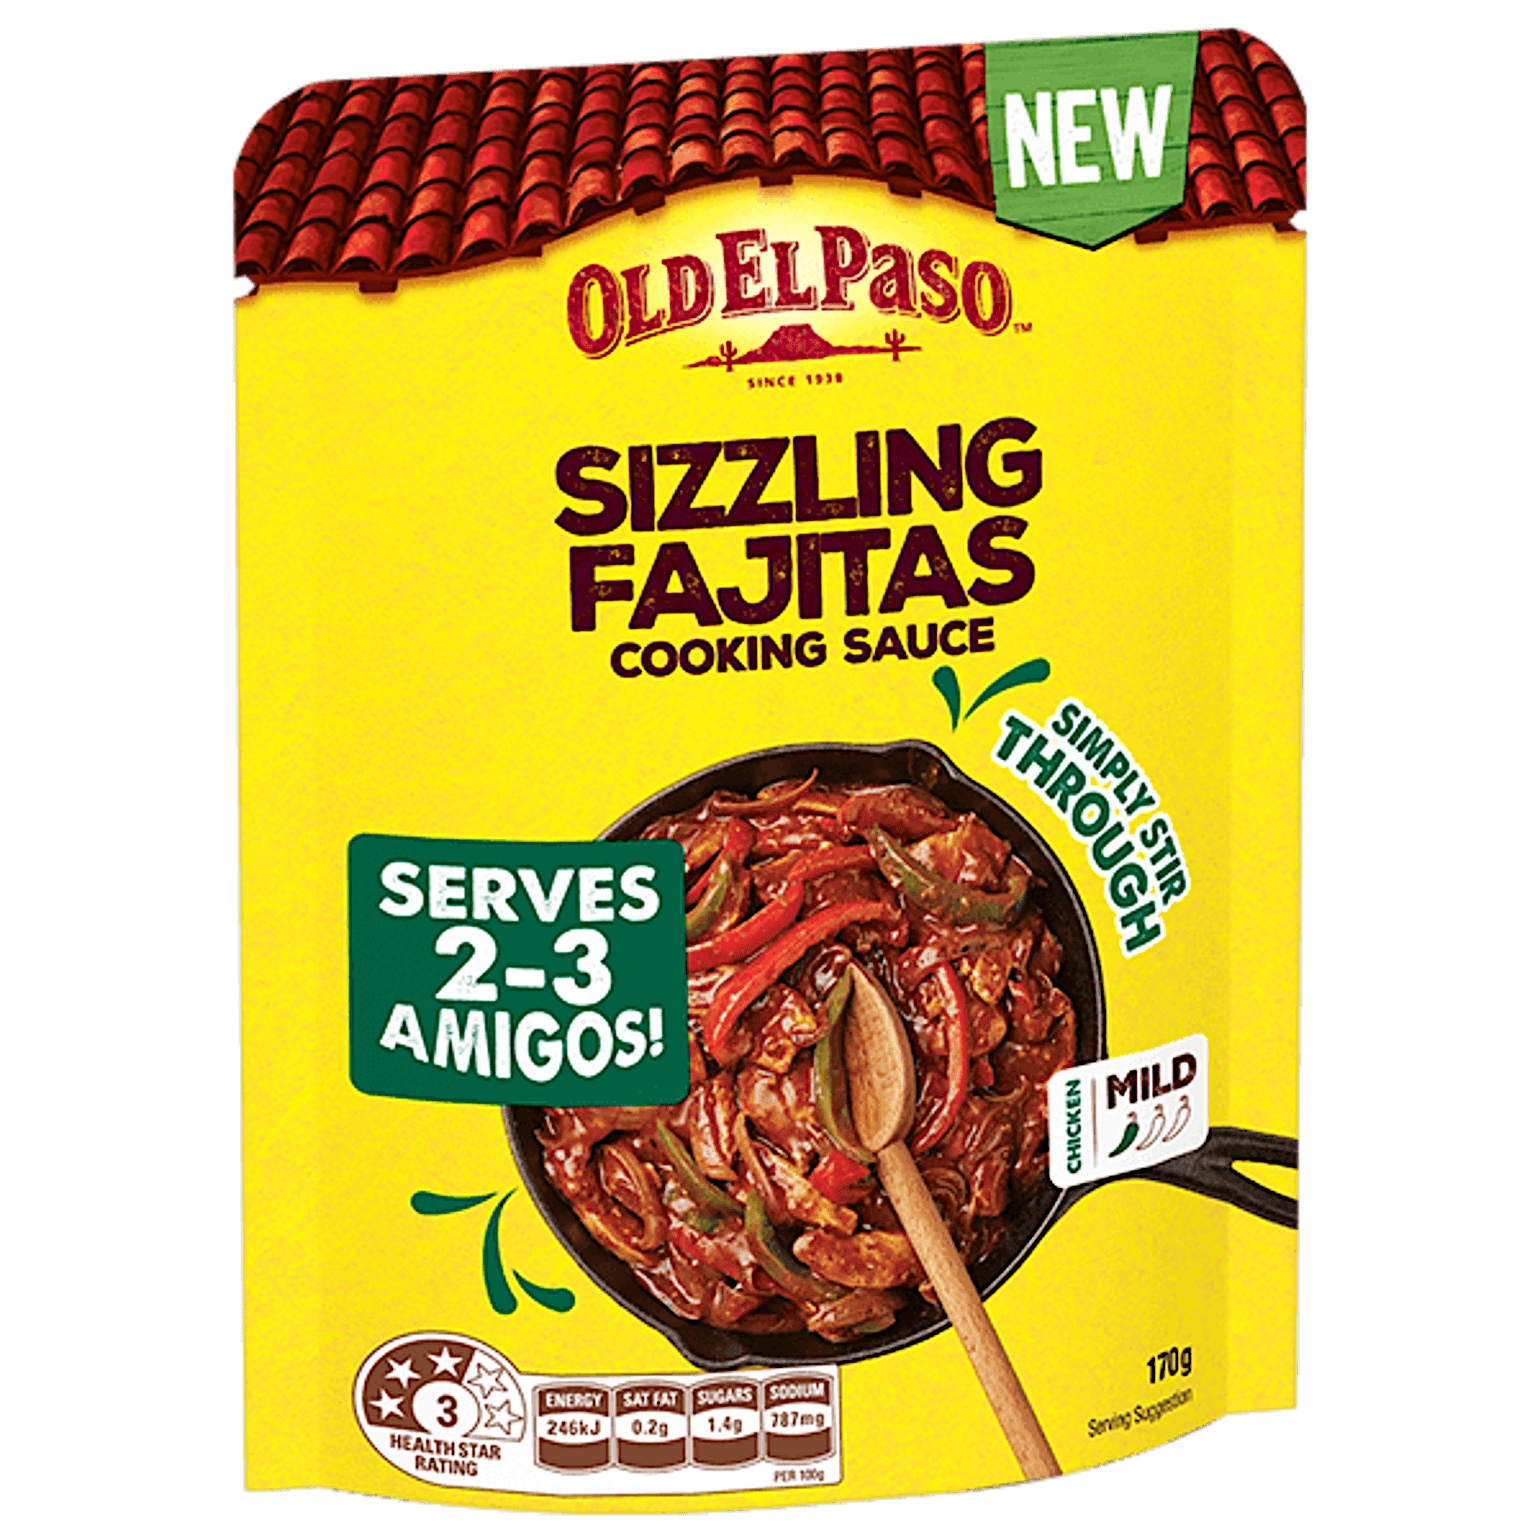 a pack of Old El Paso's sizzling fajitas chicken cooking sauce mild (170g)